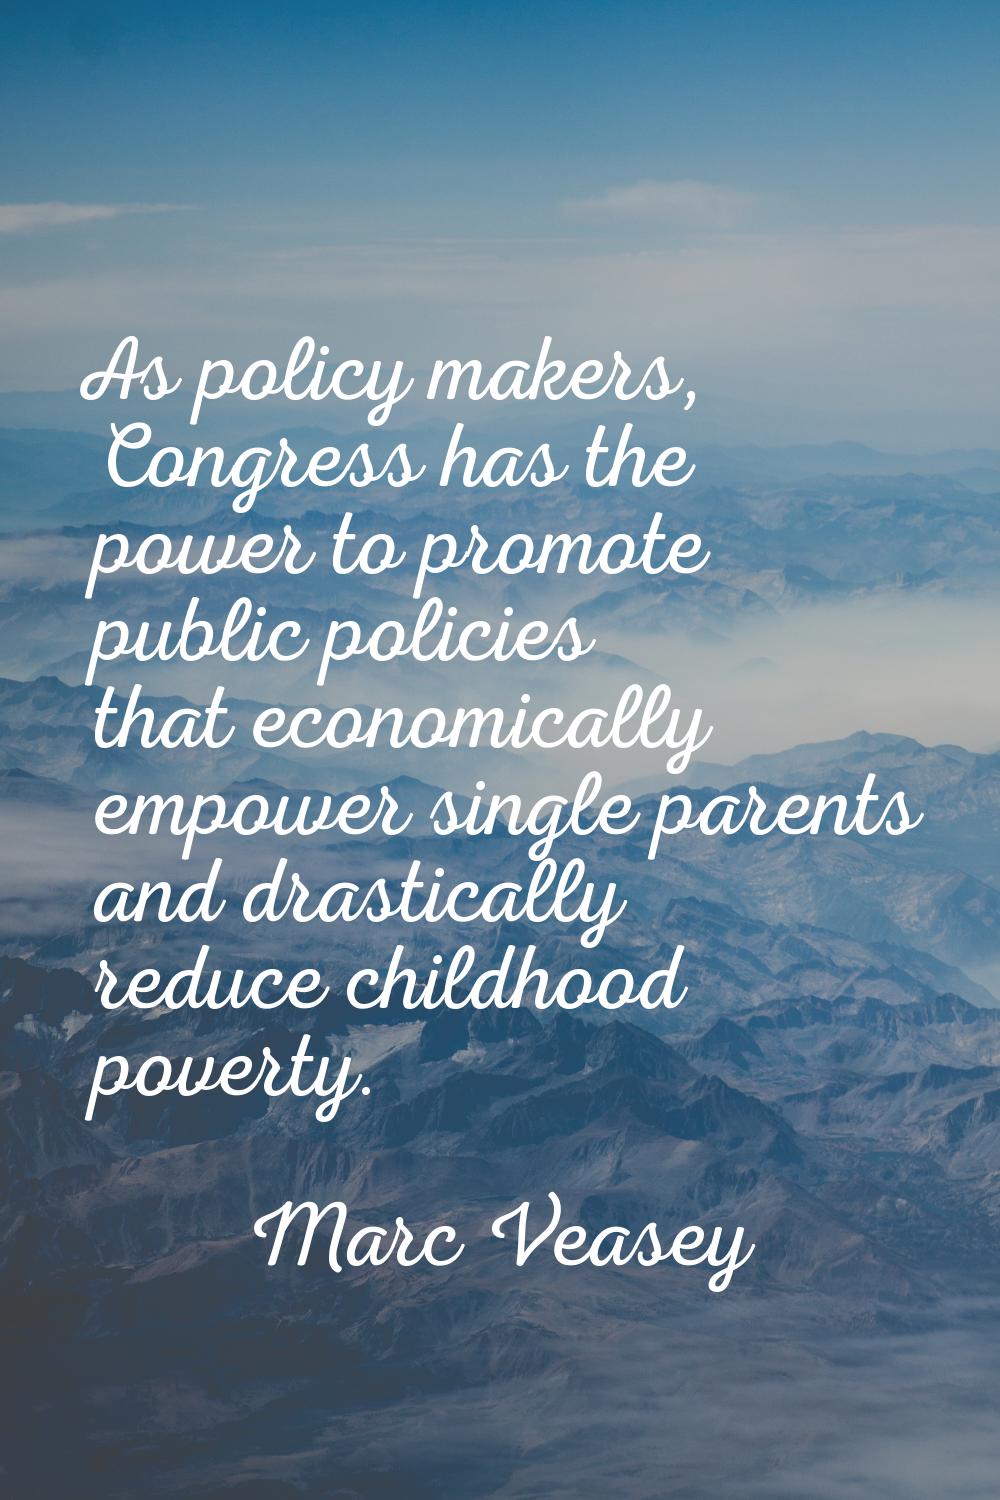 As policy makers, Congress has the power to promote public policies that economically empower singl